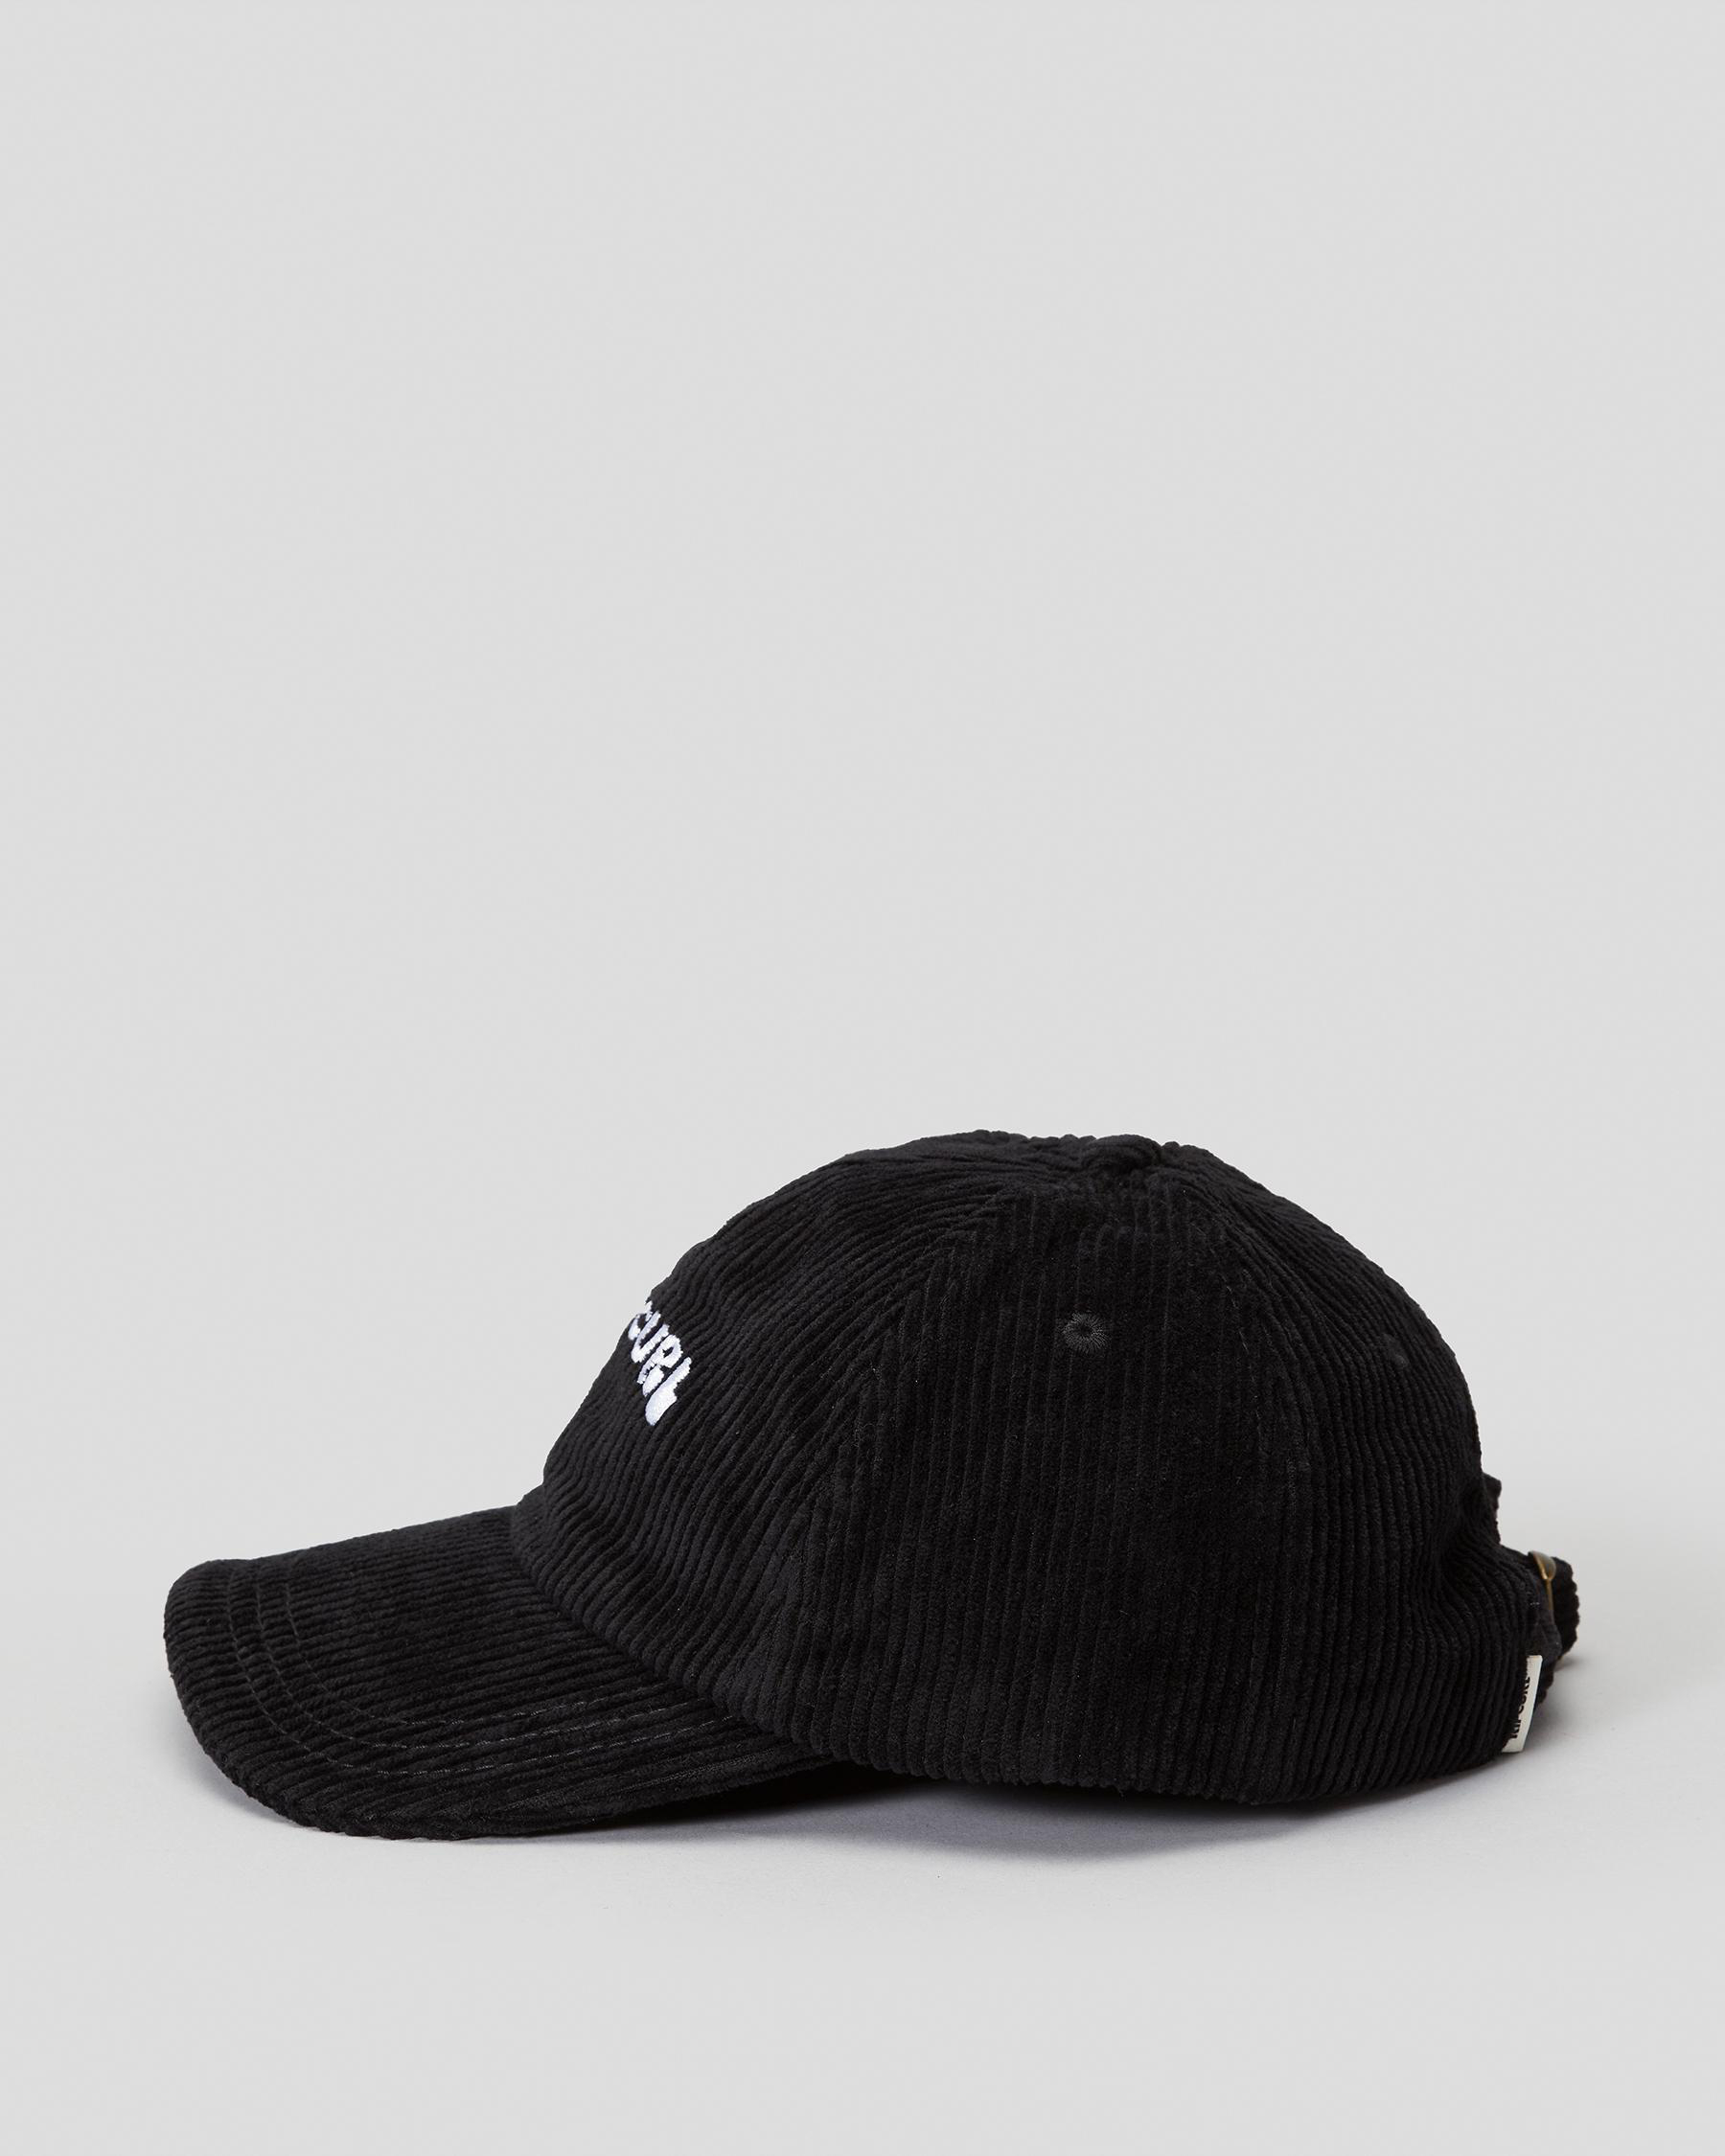 Rip Curl Cord Surf Cap In Black - FREE* Shipping & Easy Returns